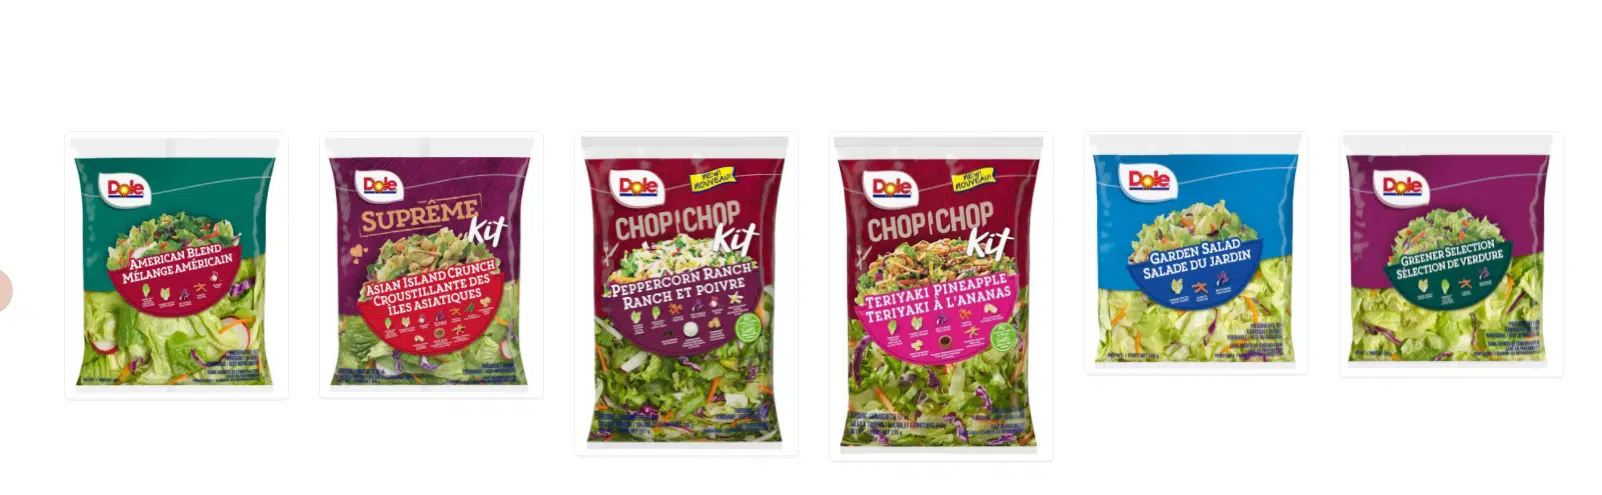 Recall Of Dole And President's Choice Salads